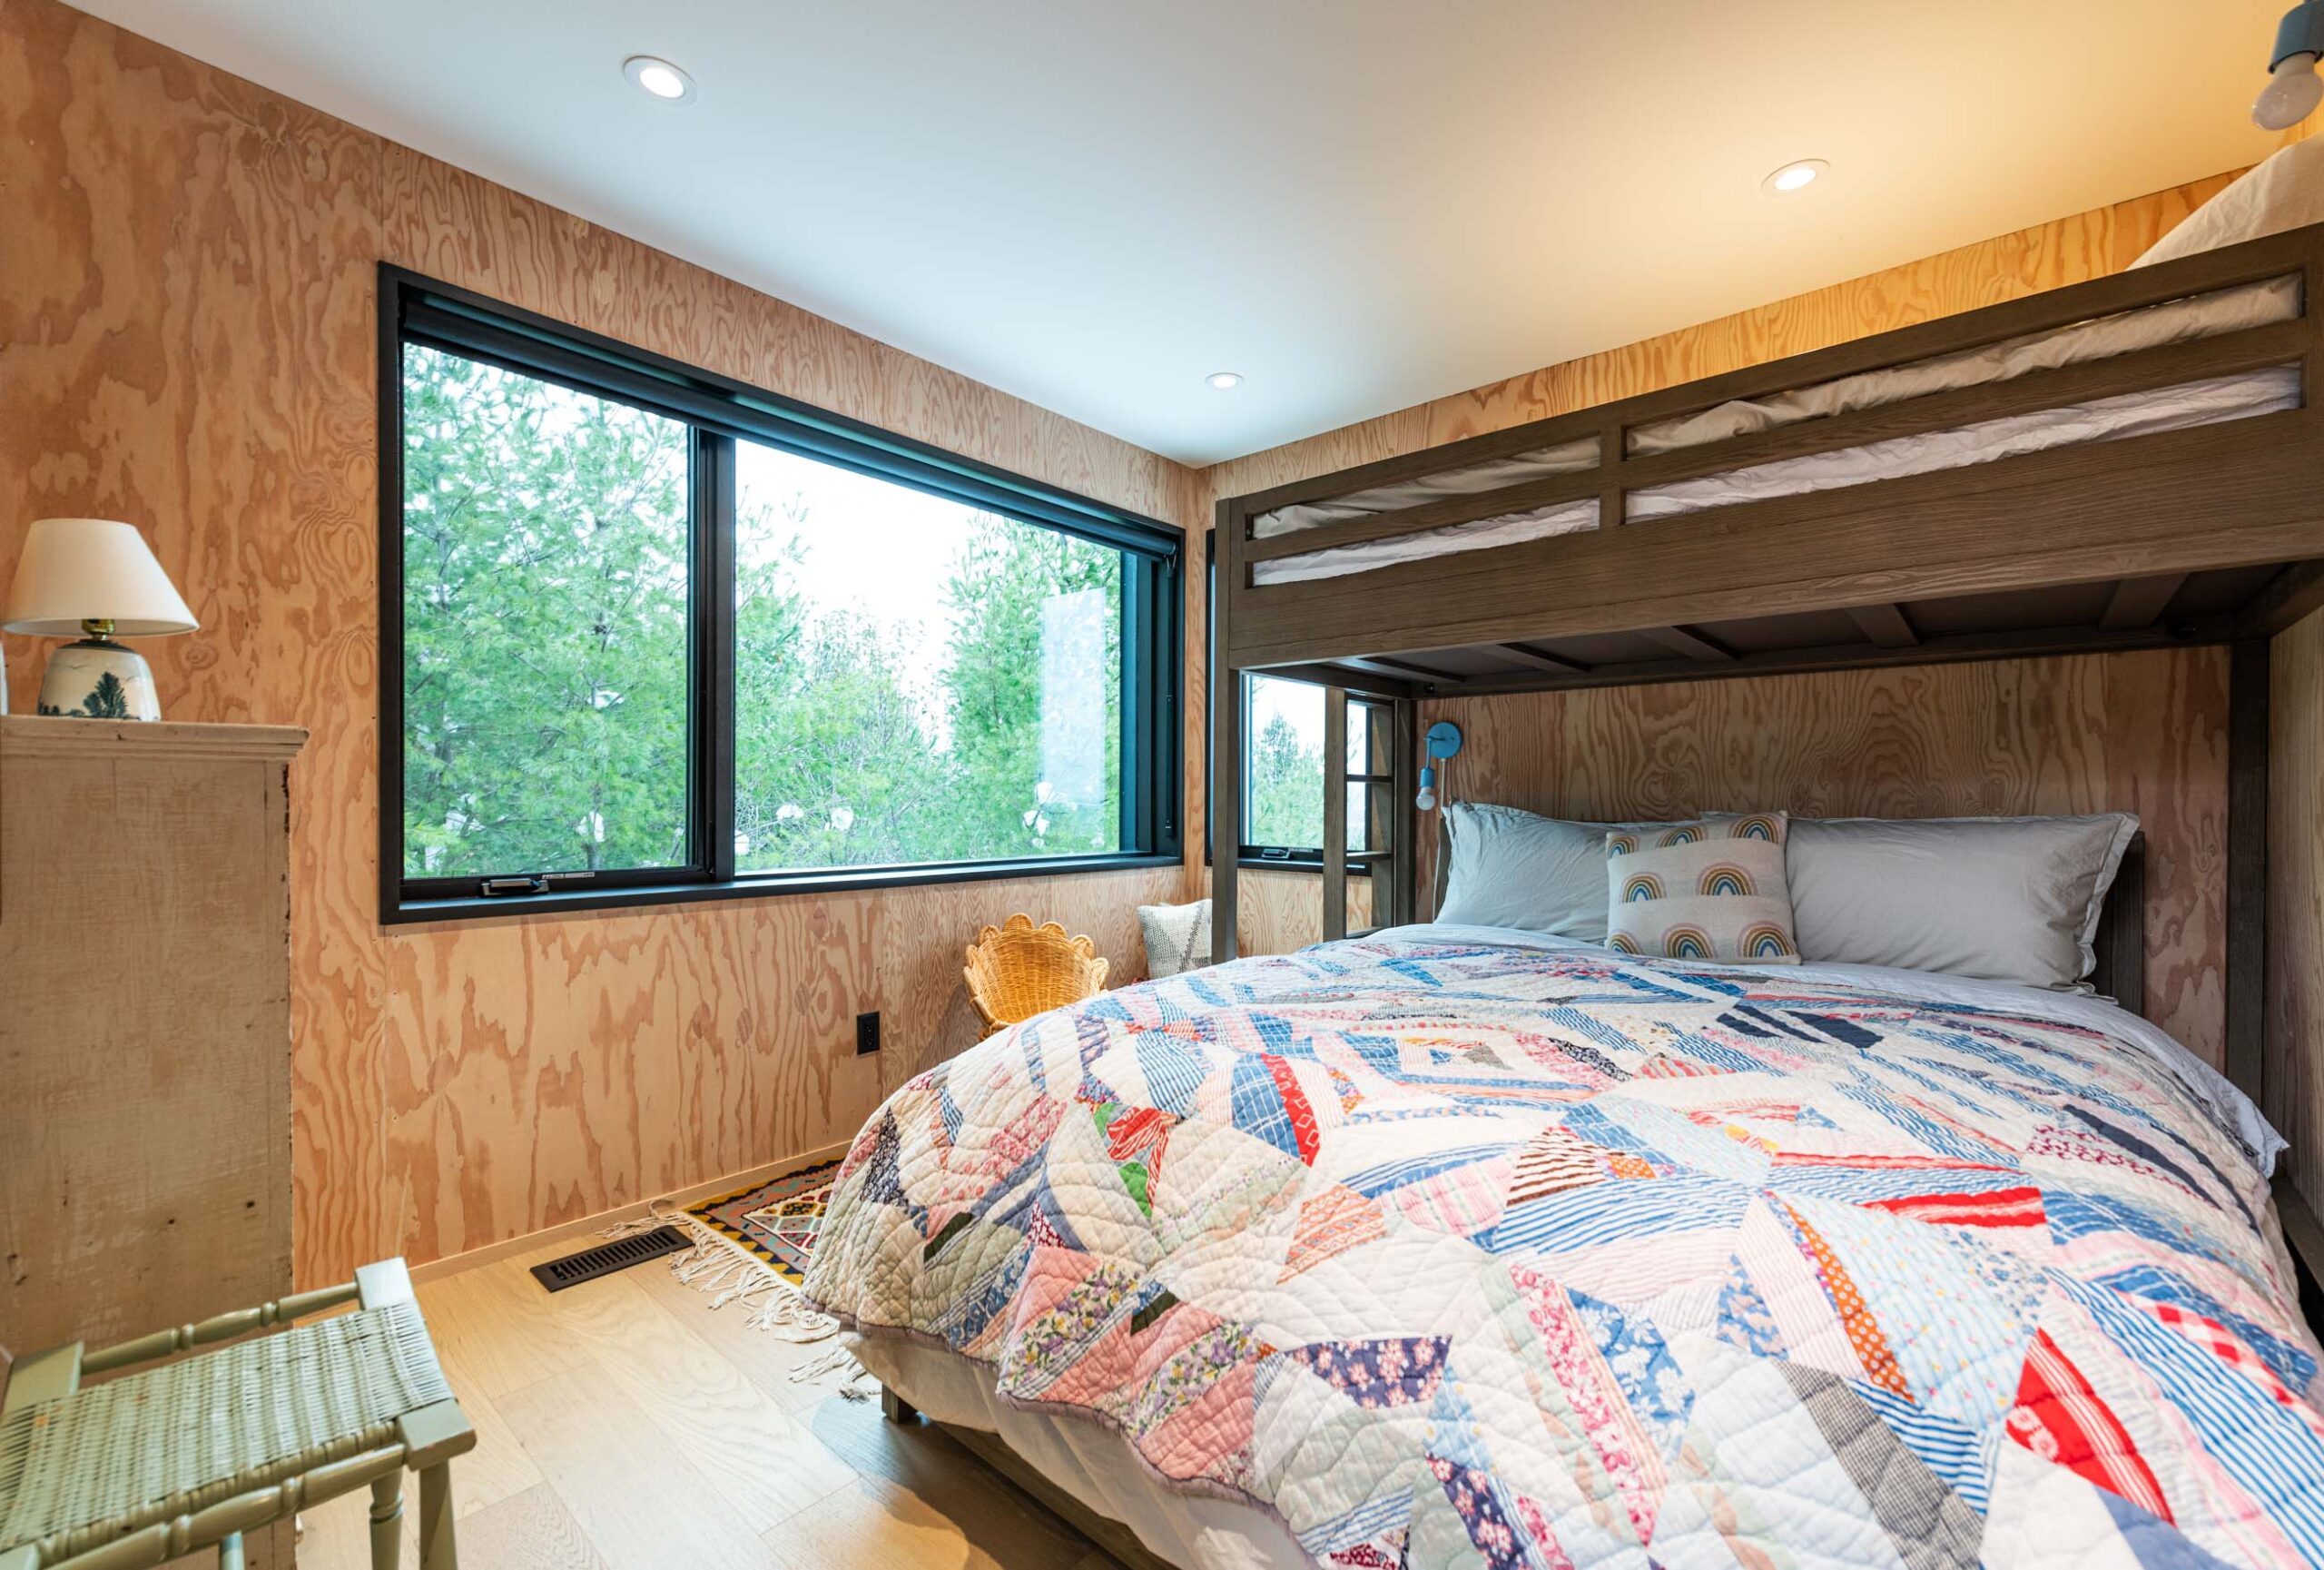 Bedroom with bunkbeds in a Custom Scandi-style Cabin built by Blake Farrow Project Management Inc.